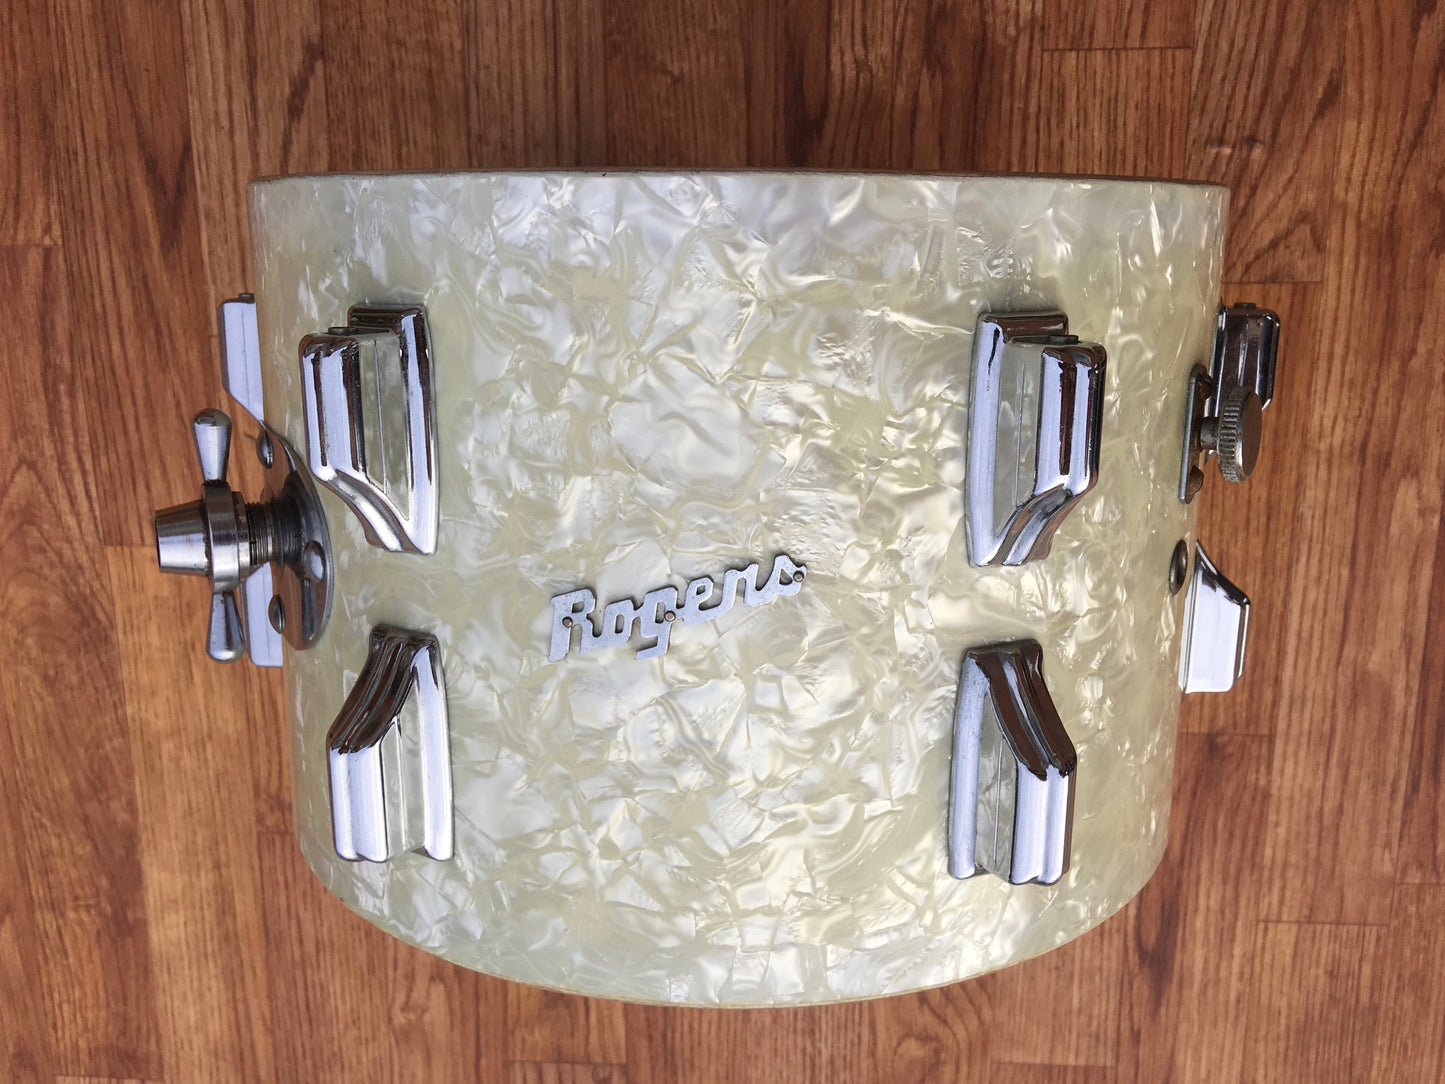 1960's Rogers Cleveland Holiday 8x12 White Marine Pearl Tom Drum